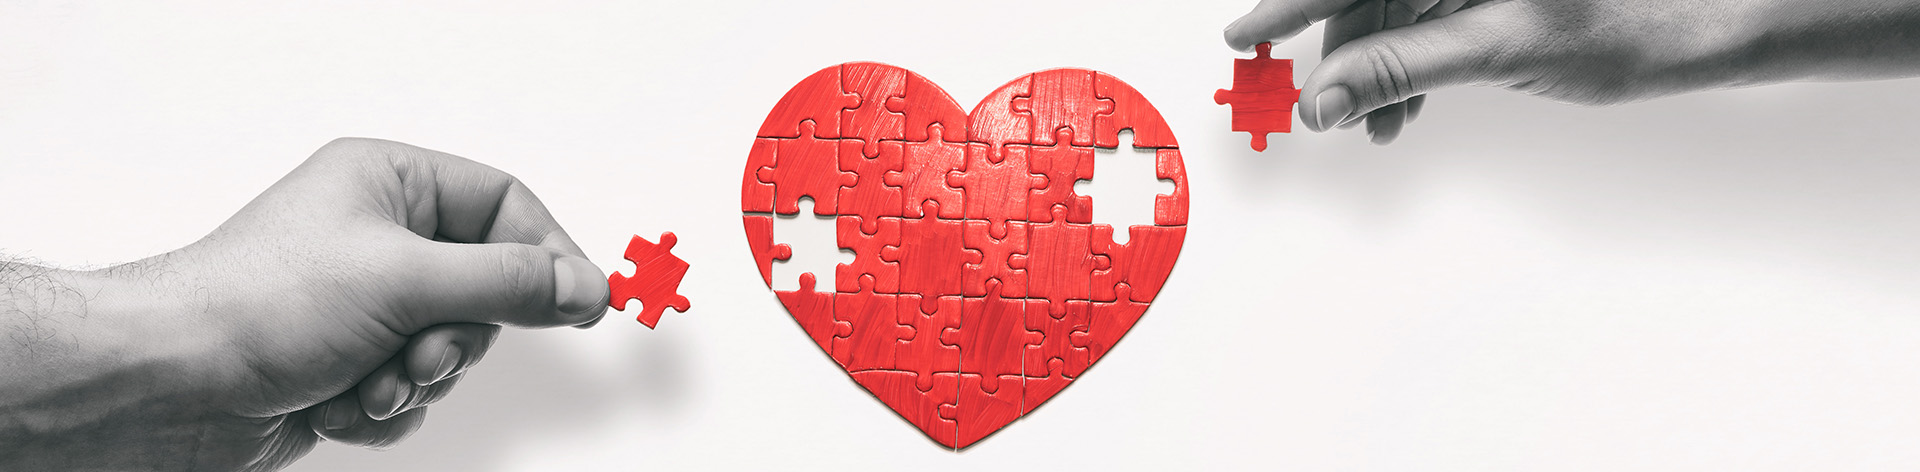 Hands holding puzzle pieces reach to complete a heart puzzle.